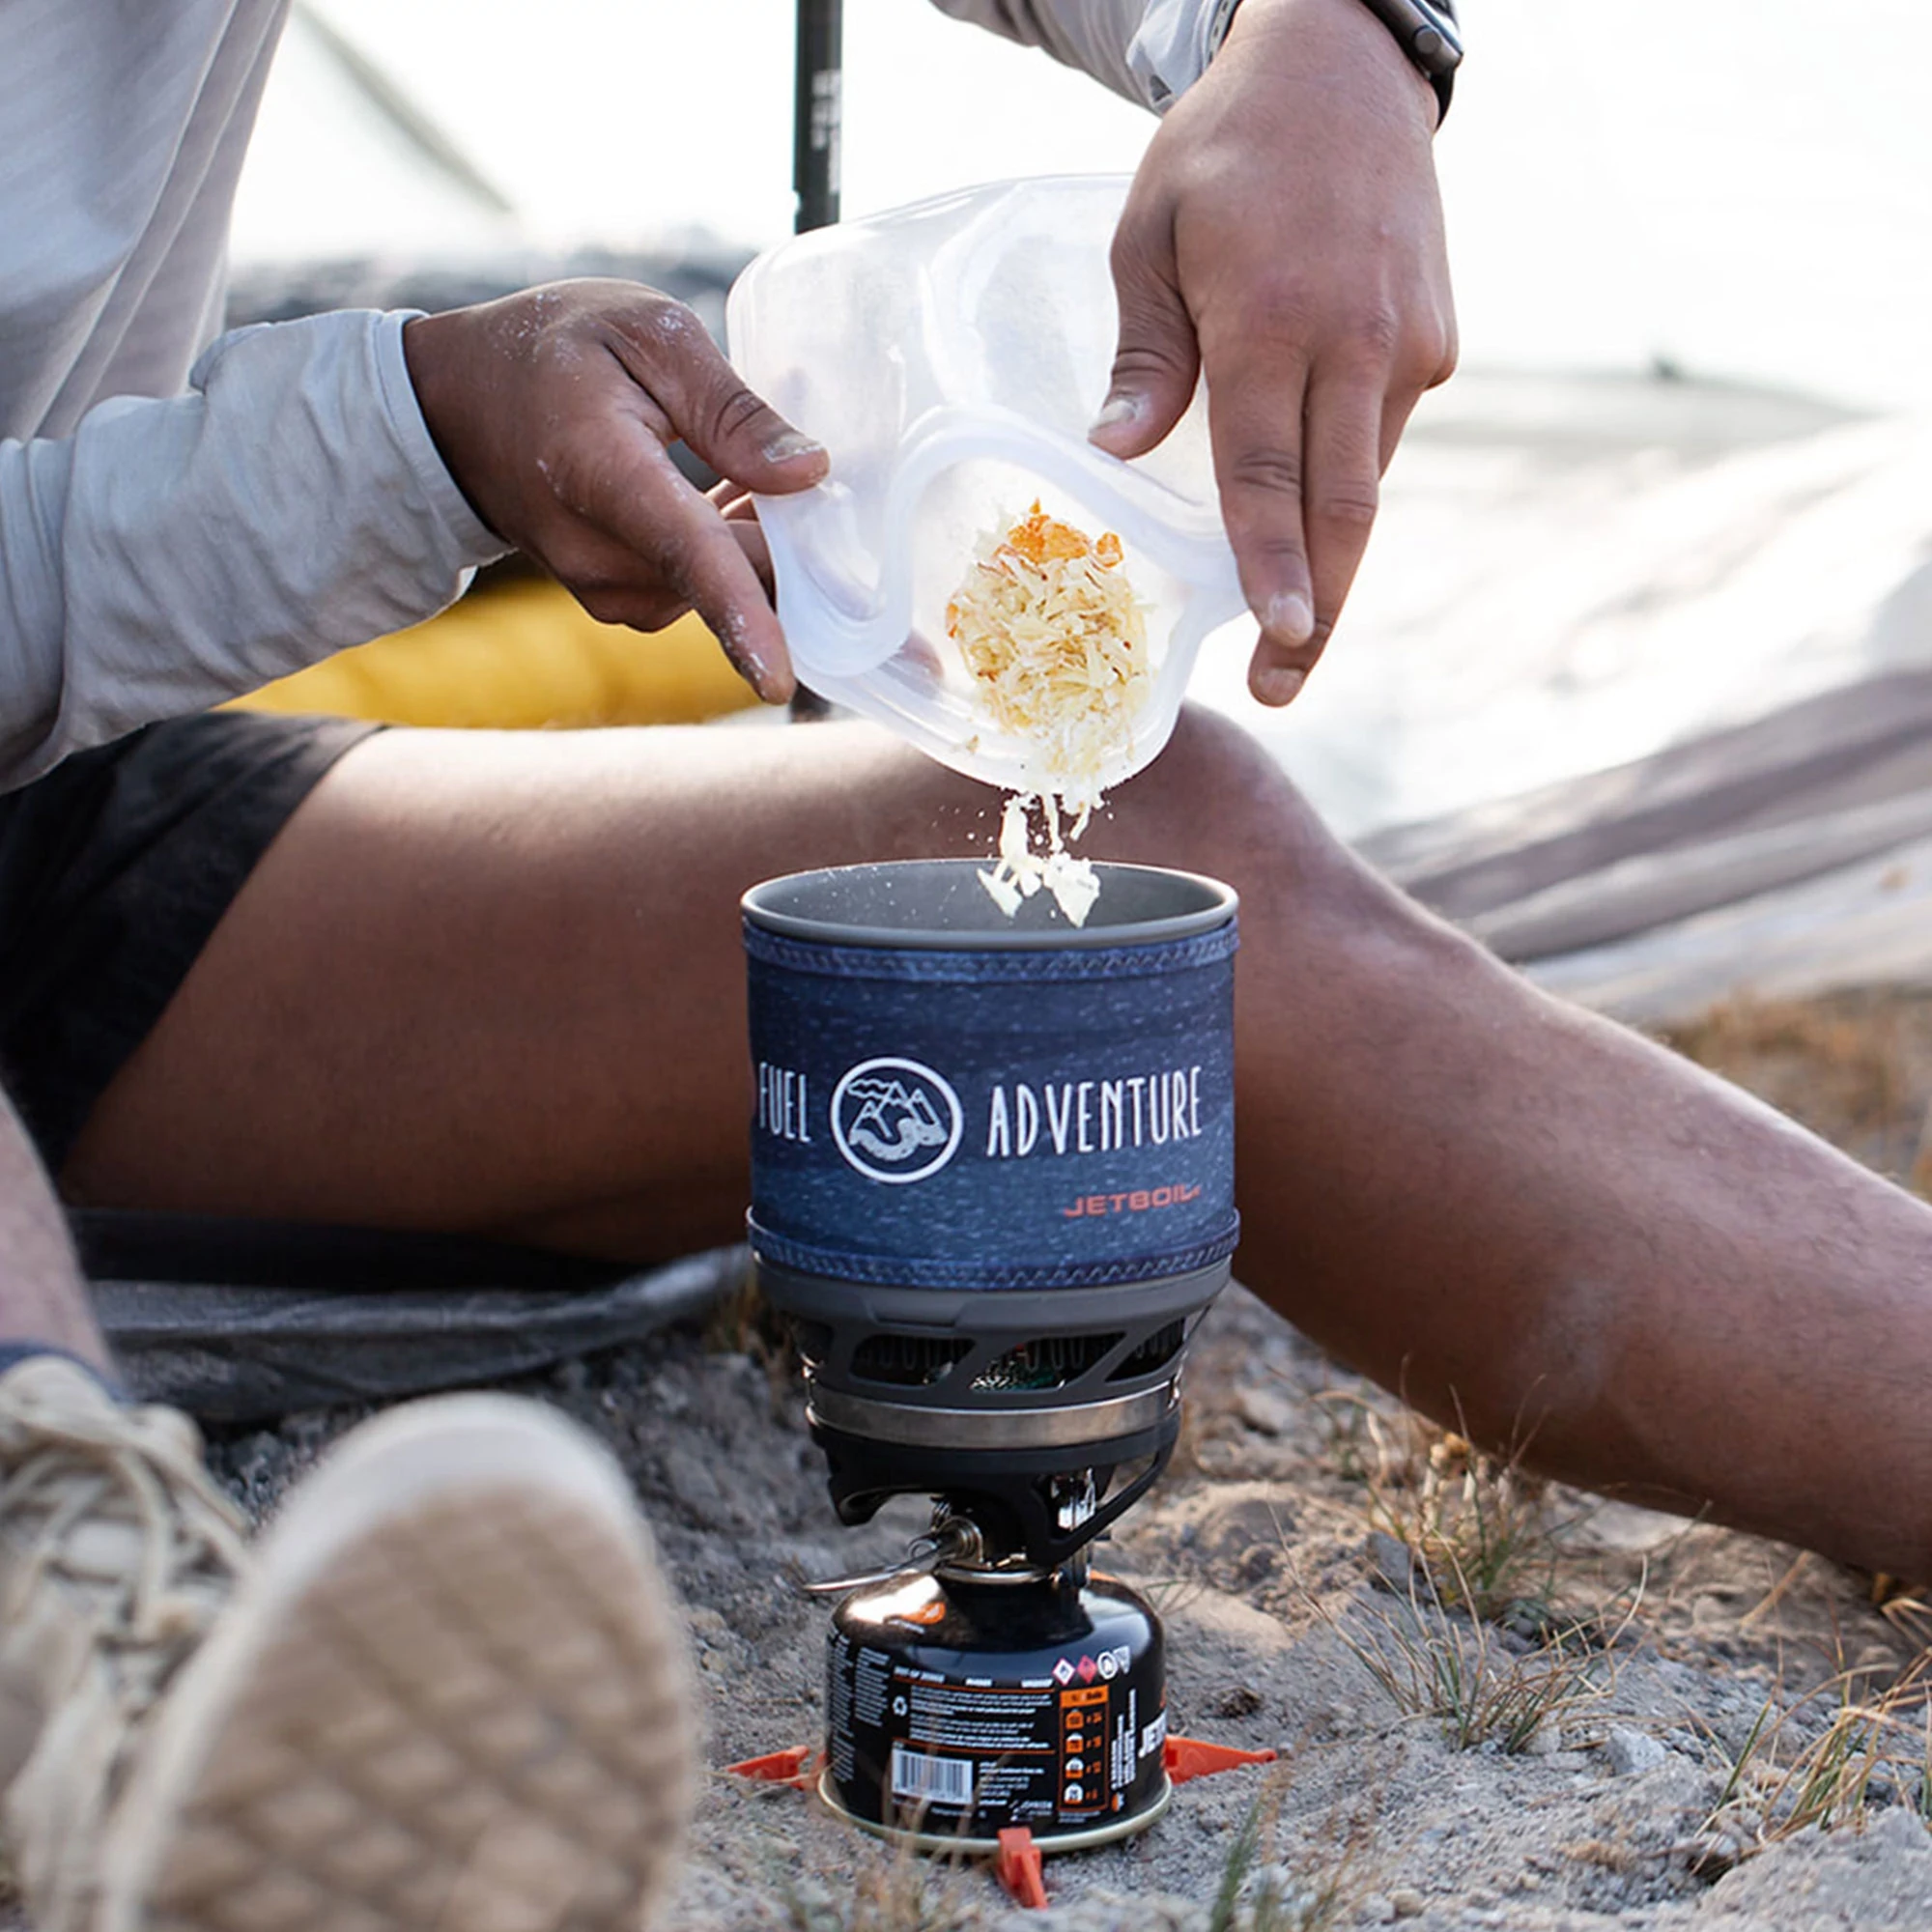 Pouring food from Stasher Sandwich Bag into Jetboil MiniMo Cooking System